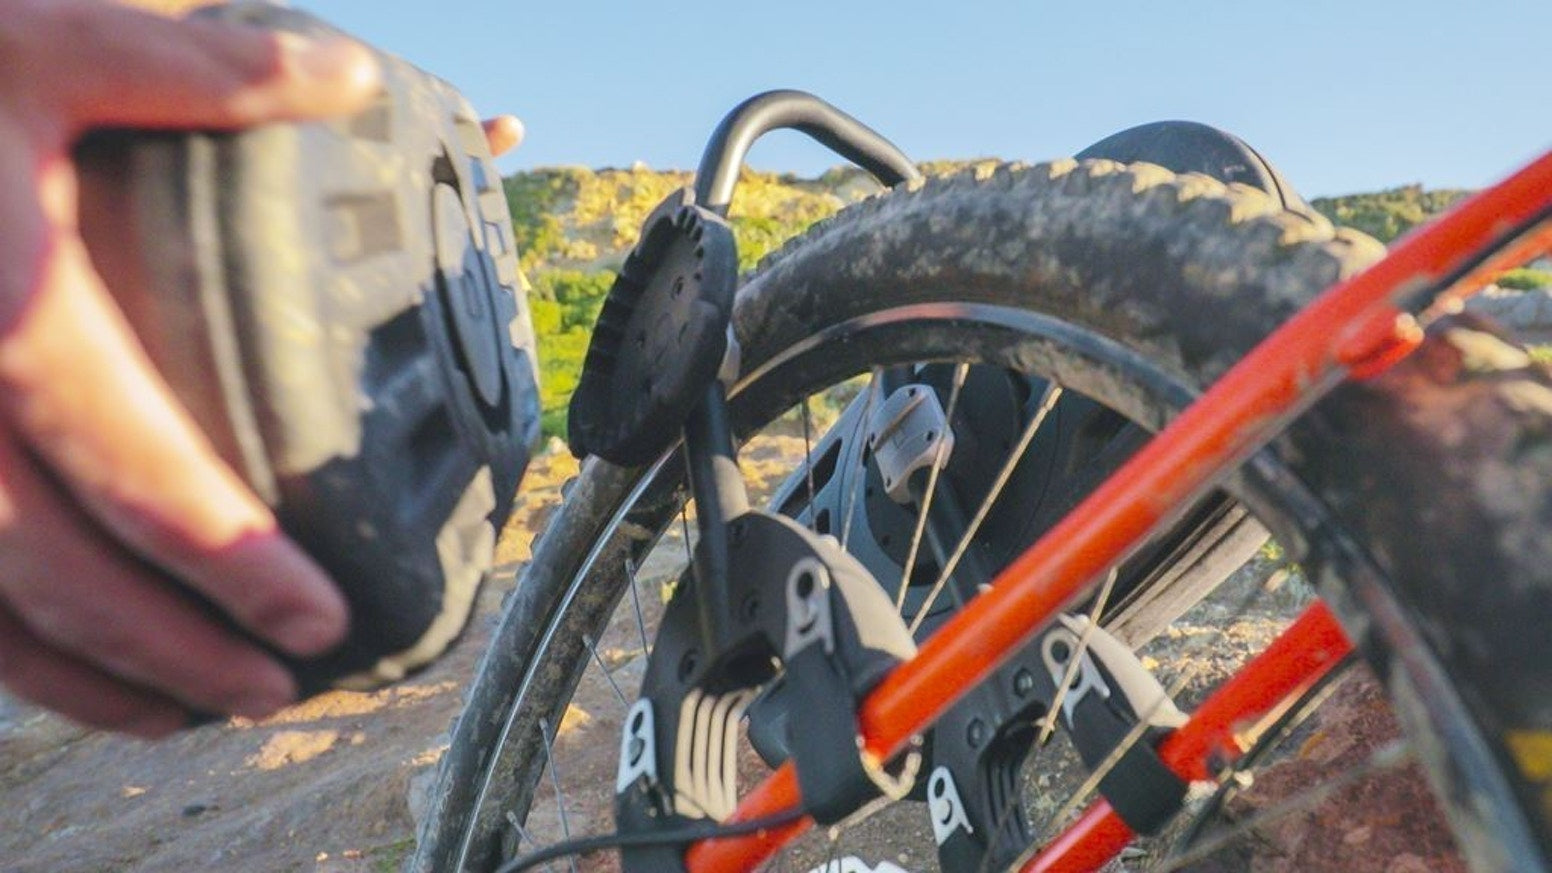 Aeroe BikePacking - the most versatile means of carrying gear on a bike.